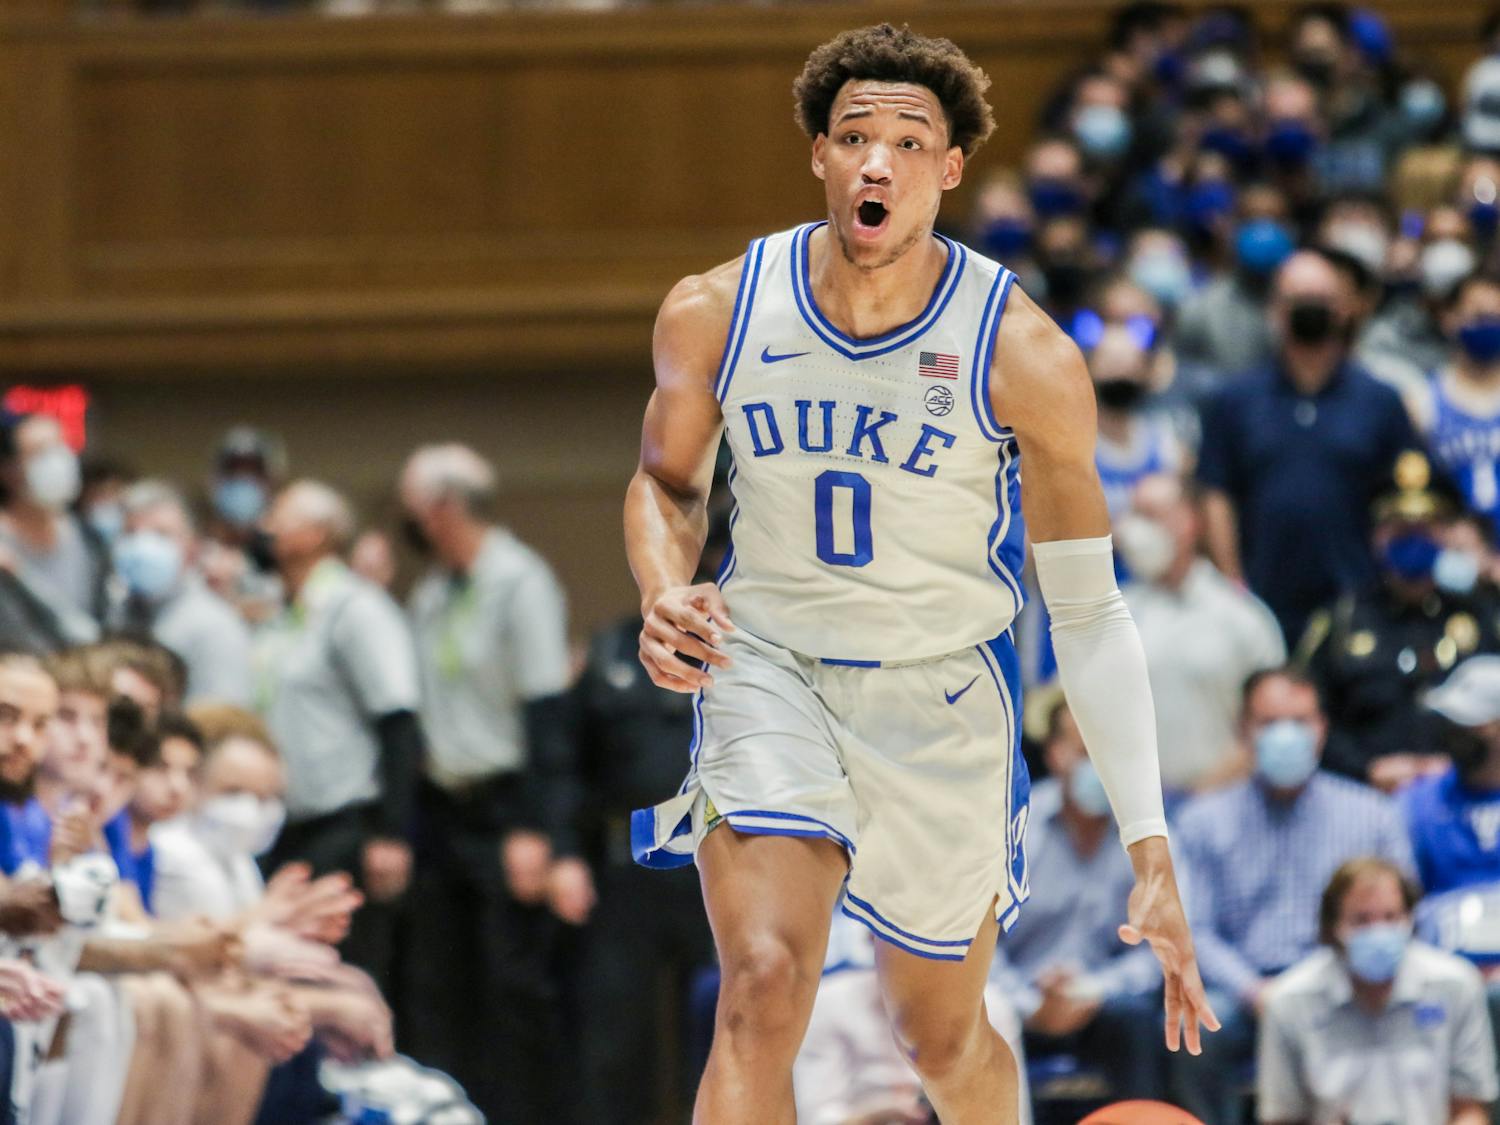 Junior captain Wendell Moore Jr., has led Duke all season, and once again showed out with a team-high 21 points and six assists.